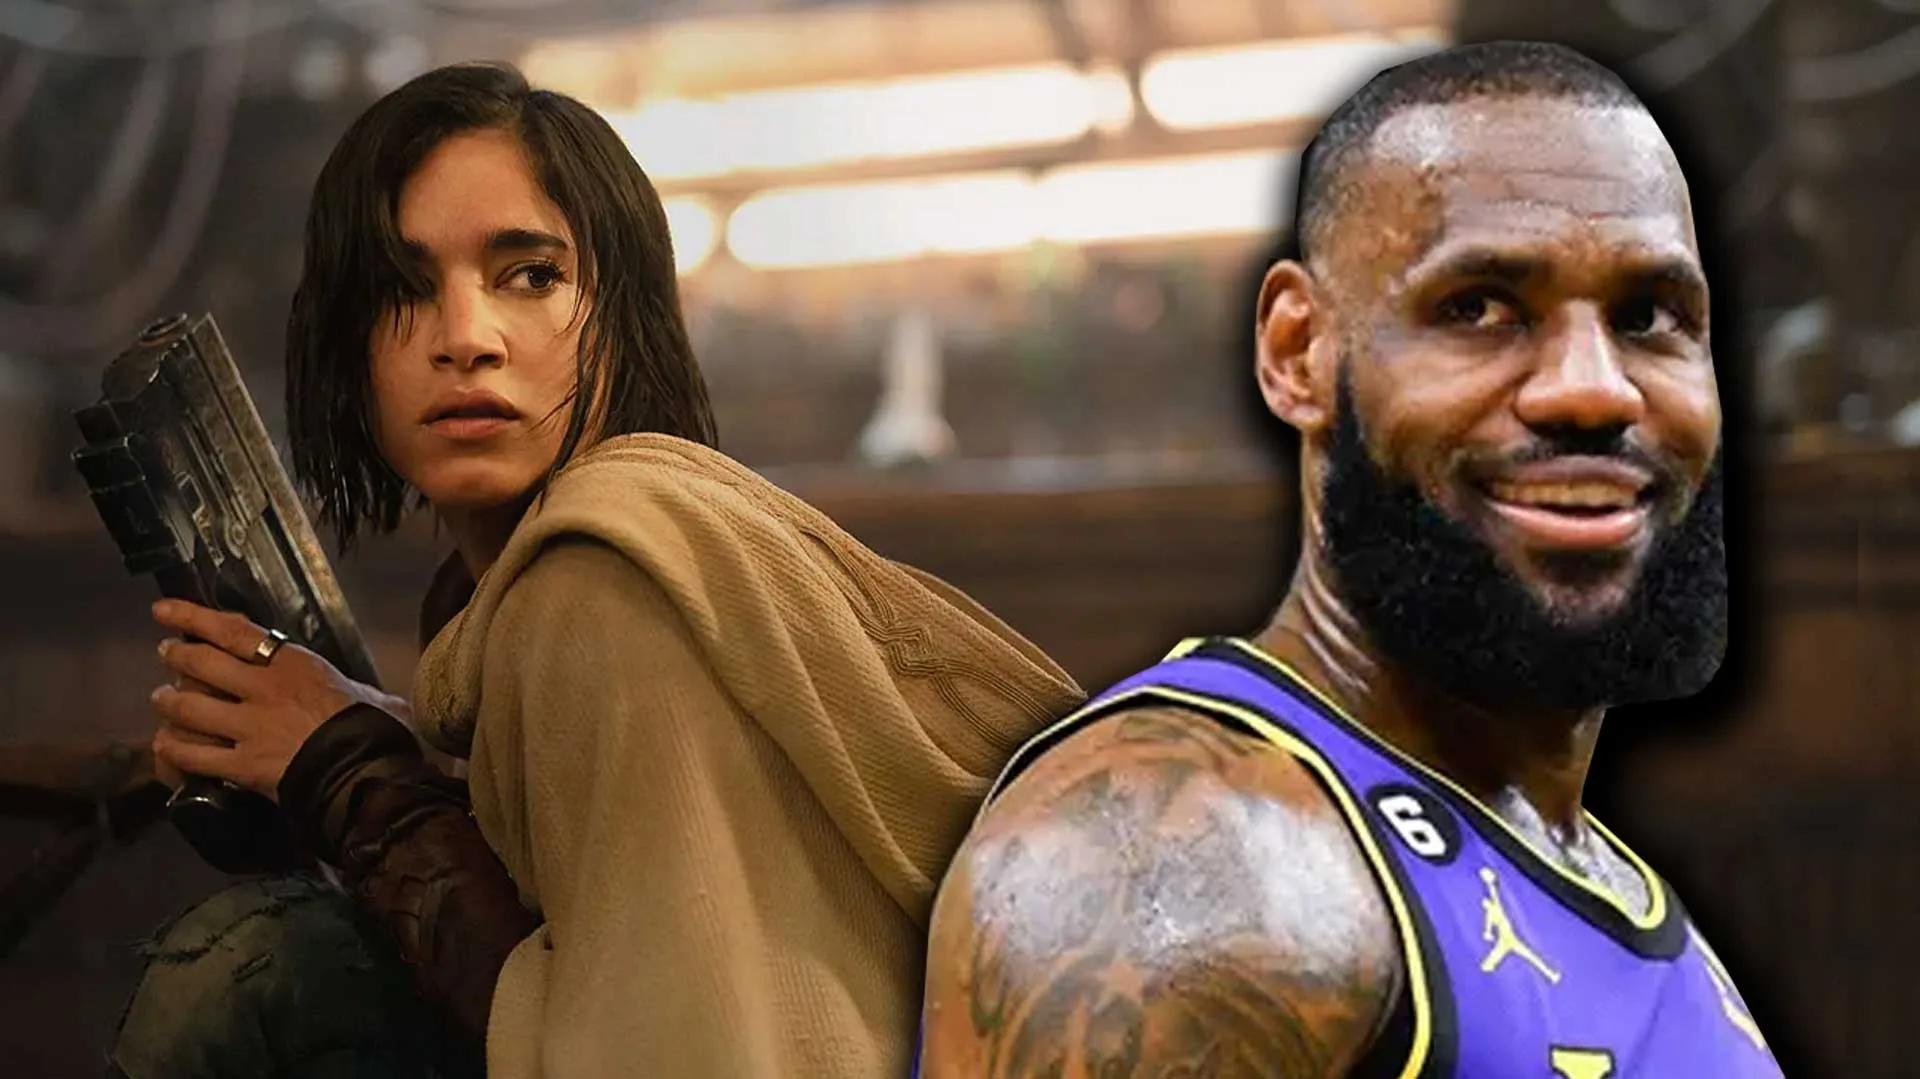 A $657.9 million franchise director says he plans to feature LeBron James in epic movie despite  LeBron initial disappointing  Michael Jordan sequel